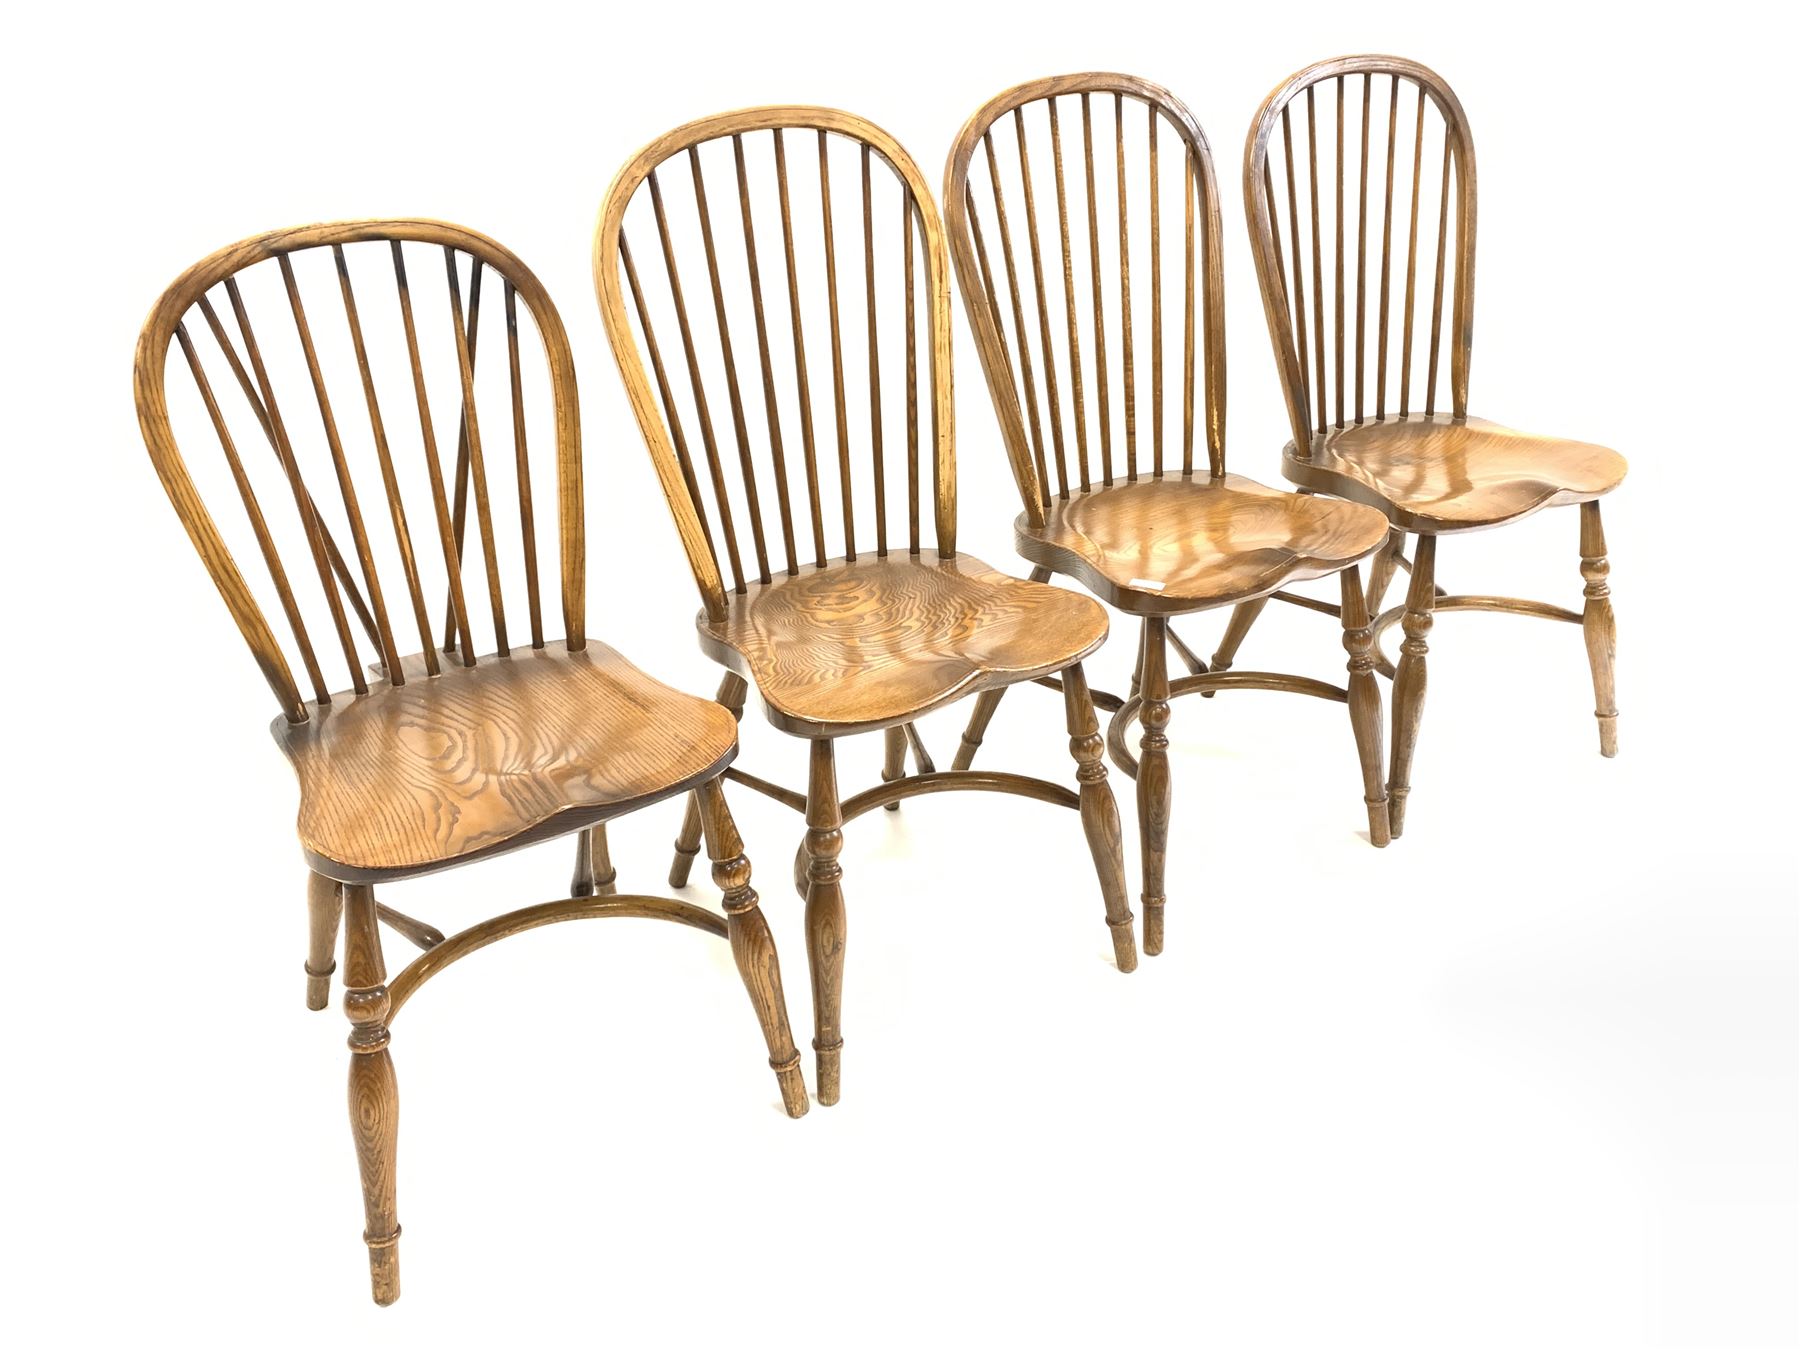 Matched set four 20th century elm Windsor dining chairs - Image 2 of 2